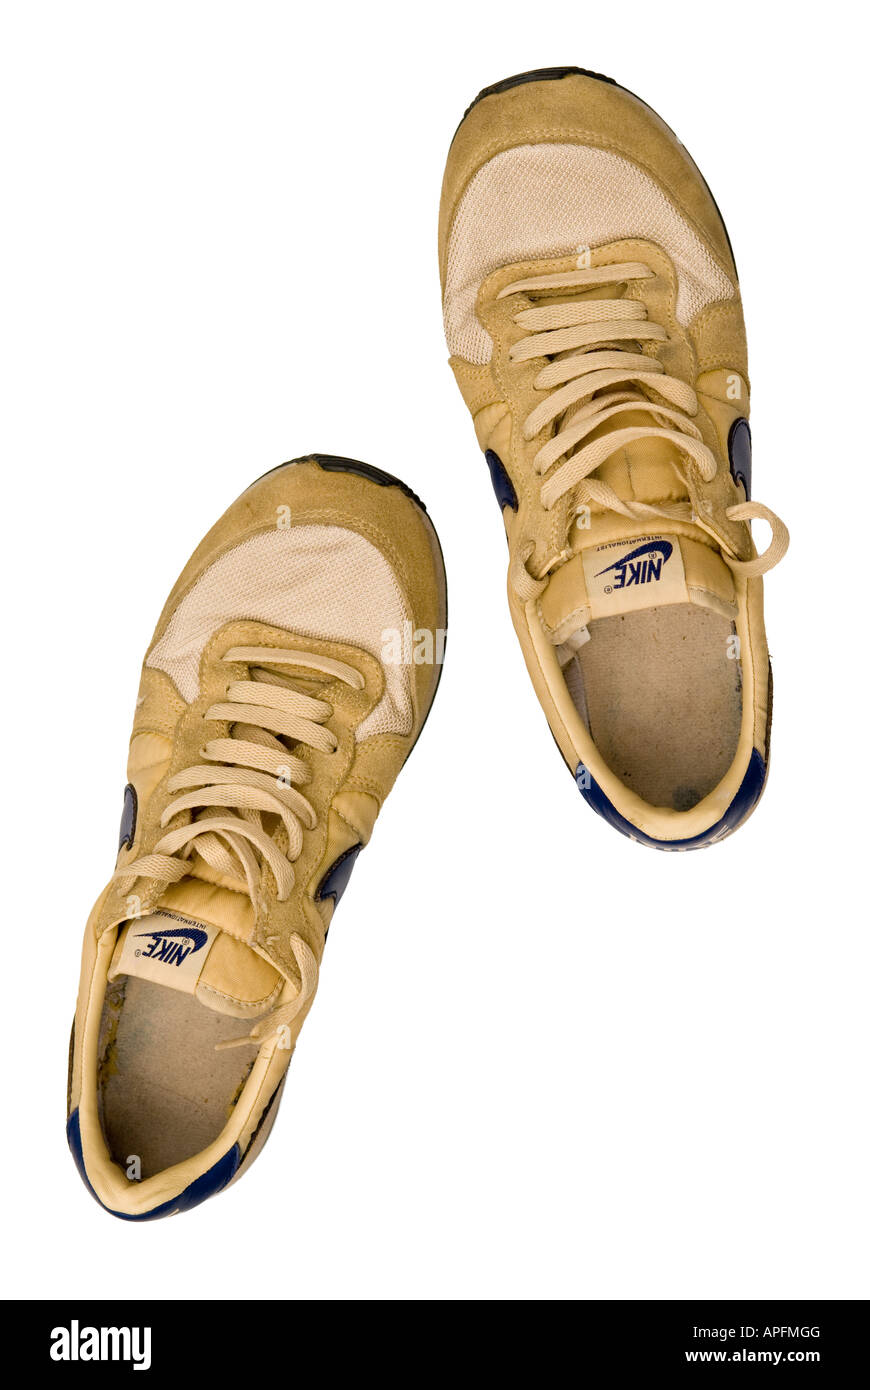 Pair of Old Running Trainers Stock Photo